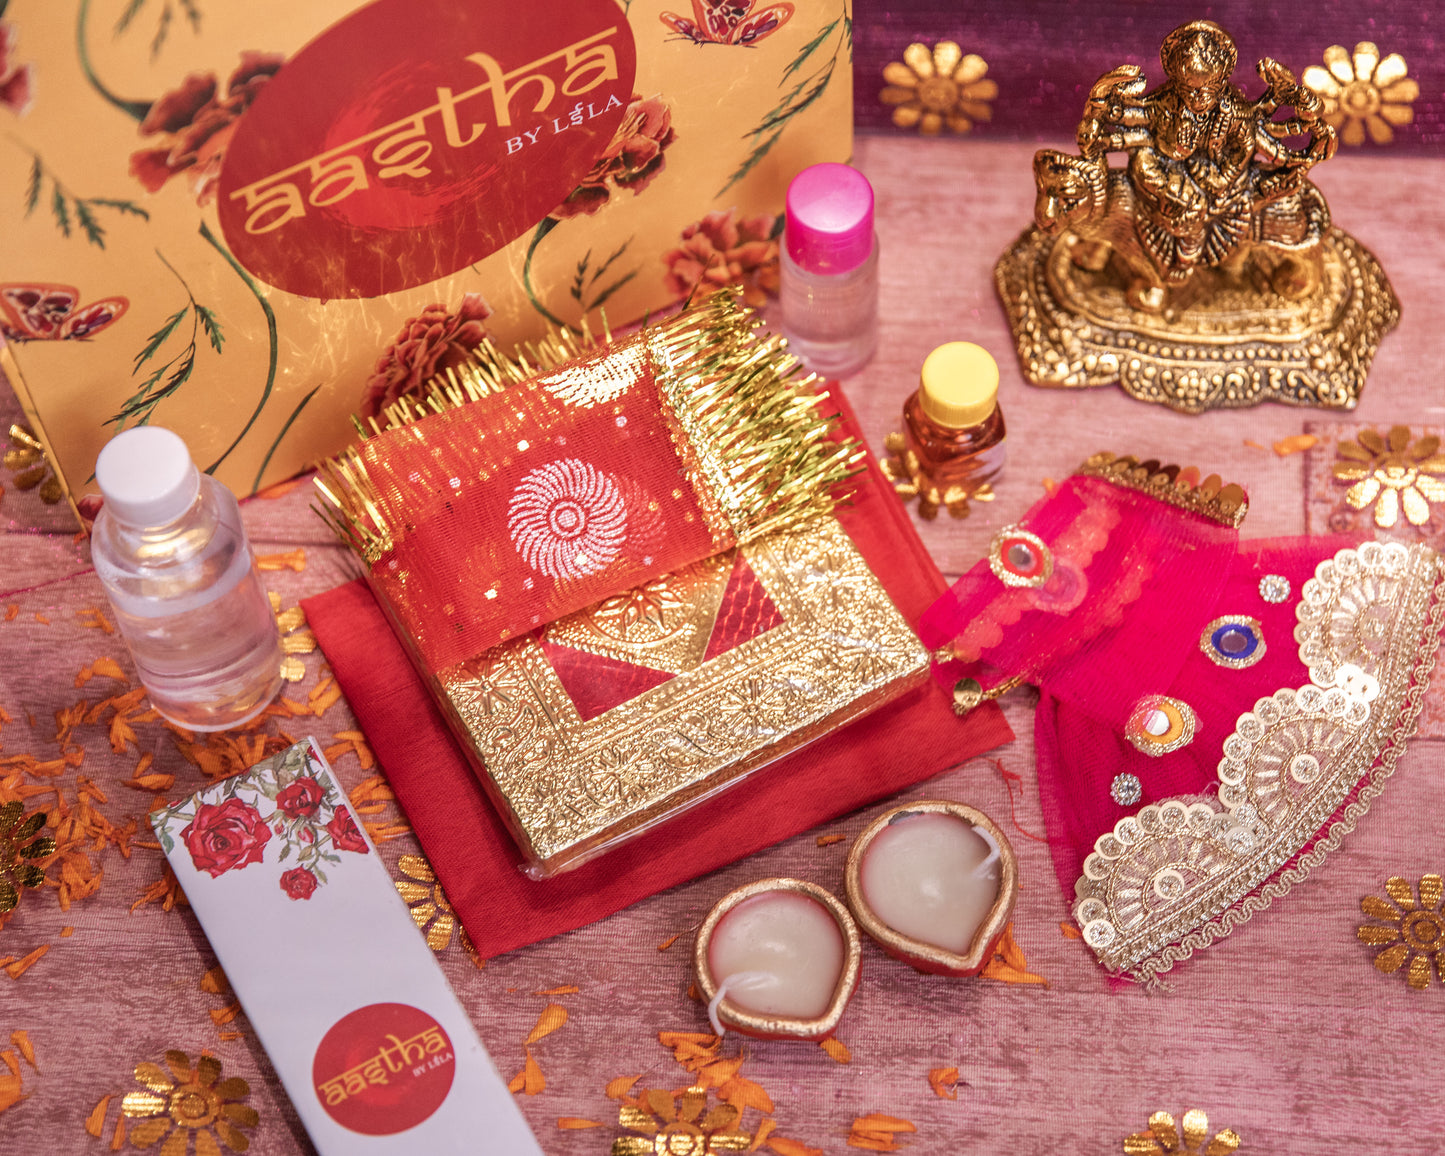 LeelaTheStore's Navratri Pooja Box is a complete set that includes all the essential samagri required for a proper Navratri pooja.